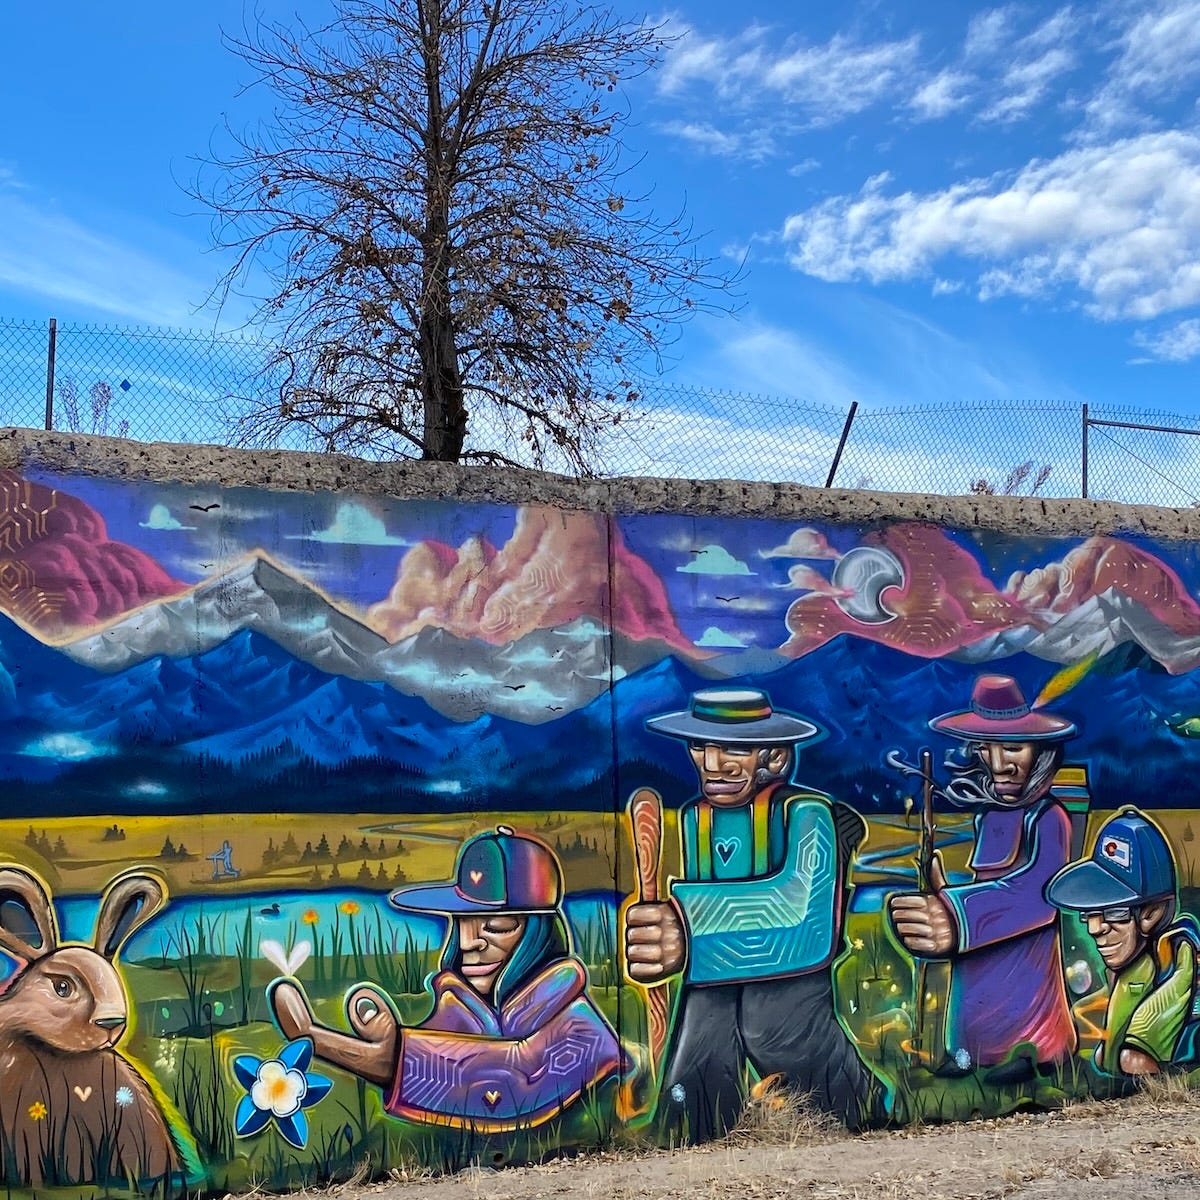 A mural painted on a wall depicting people, wildlife, flowers and mountains. Above the wall a tree grows in front of a decripit chain link fence.